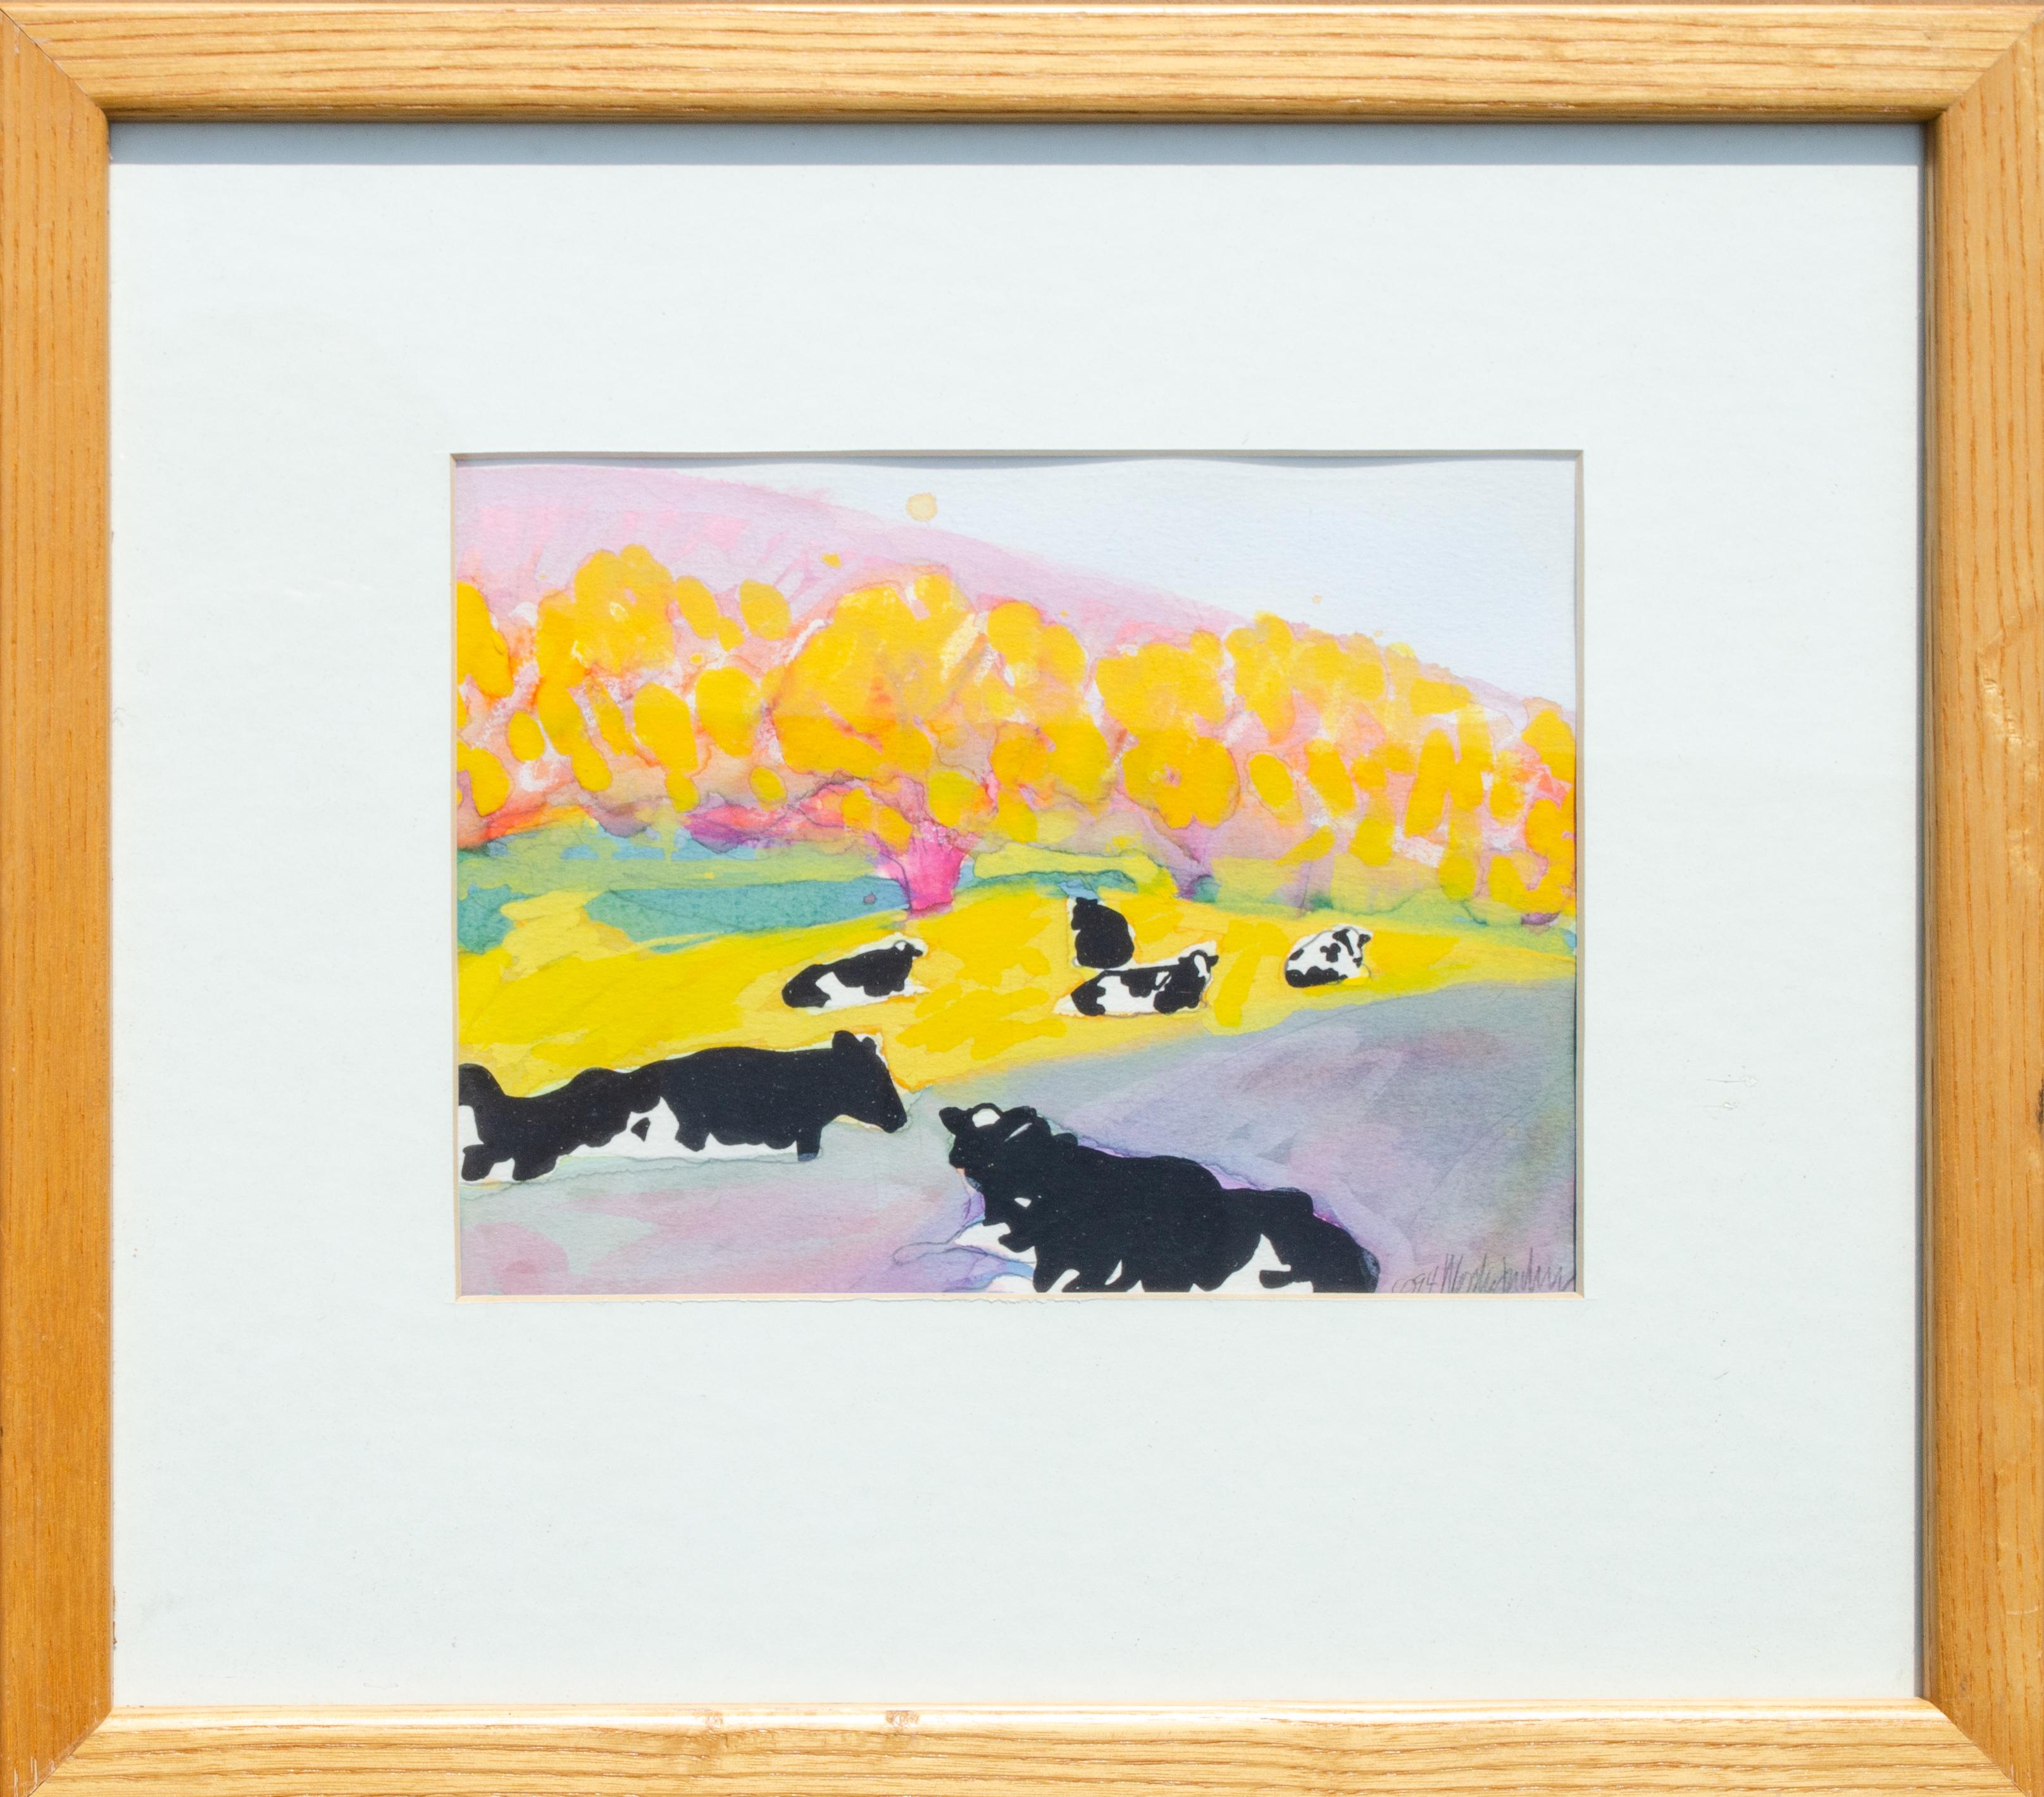 Woody Jackson
Woods Orchard, 1994
Watercolor on paper
Sight: 6 x 7 3/4 in.
Framed: 12 1/4 x 14 1/8 in.
Signed and dated lower right
Signed, titled, and dated verso

If you’re a fan of Ben & Jerry’s ice cream, then you are a fan of Woody Jackson,